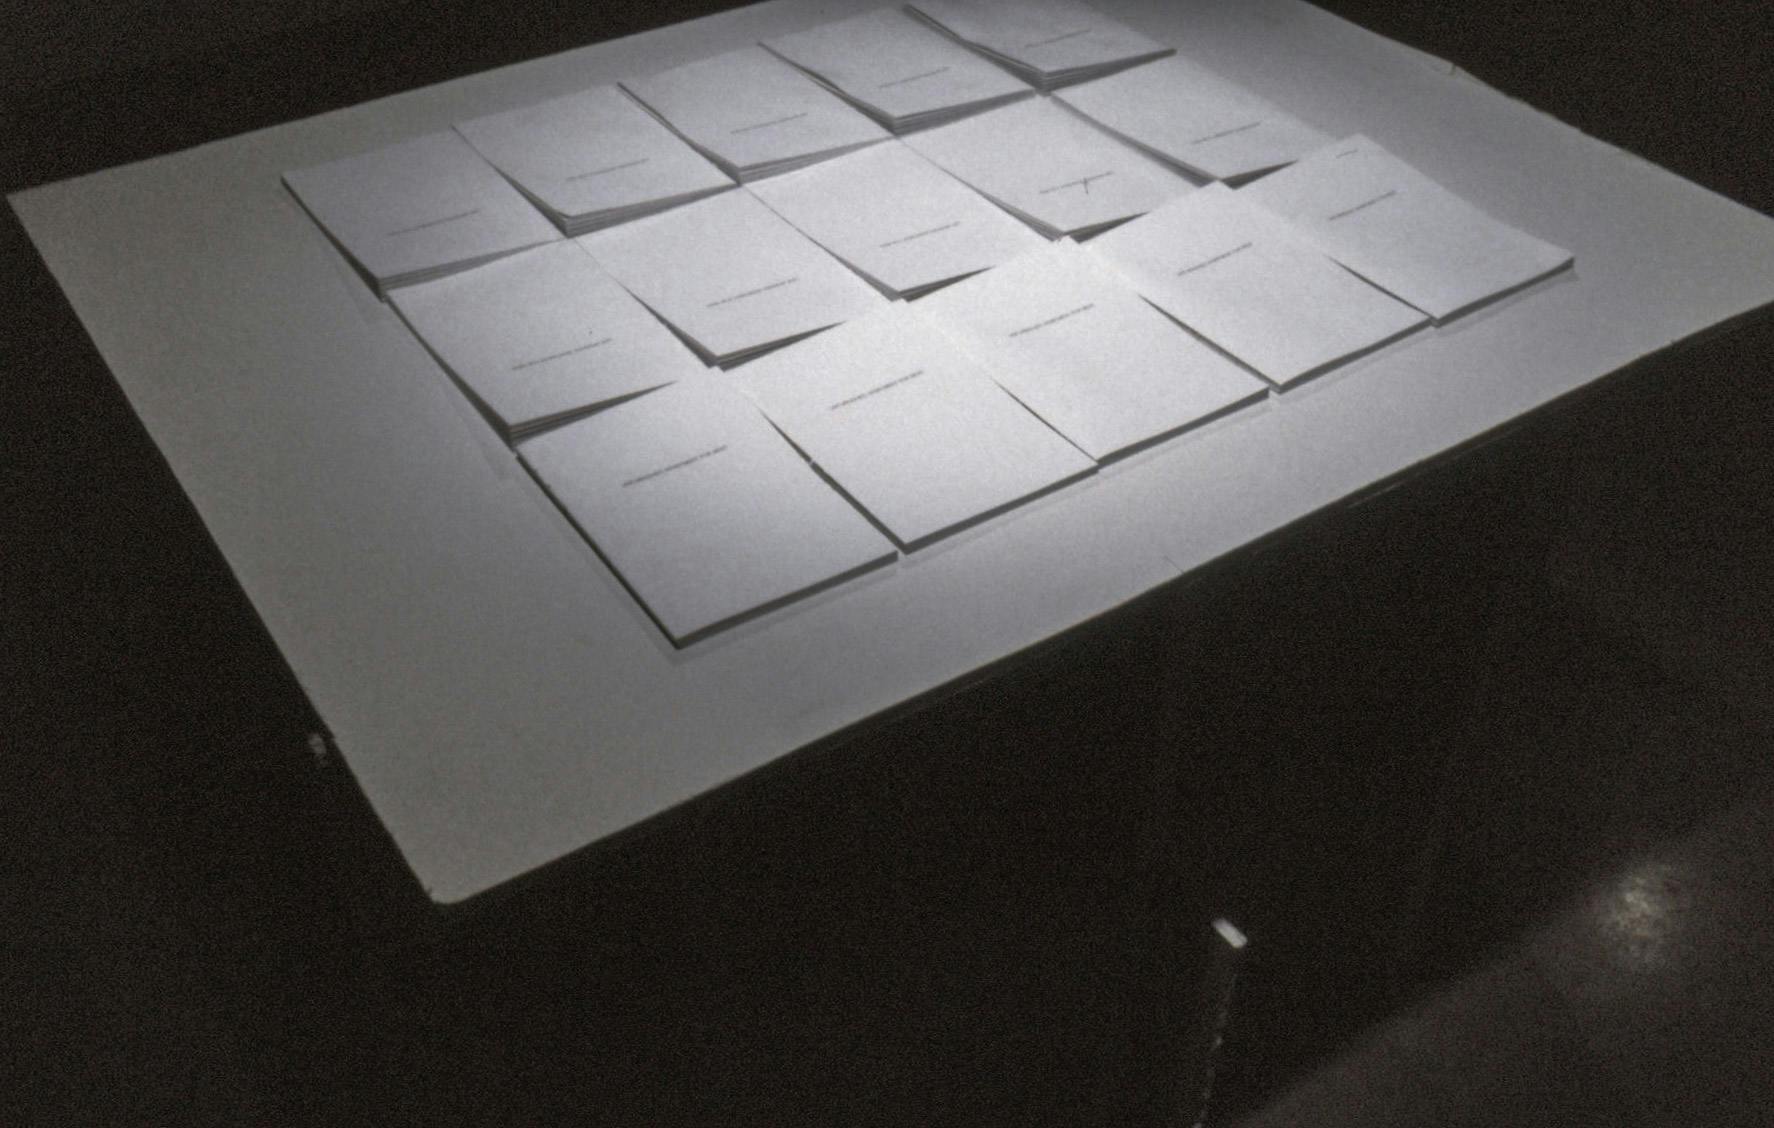 15 sets of paper documents are placed on a white table. The room is dark and the light is casting directly from above the table. 